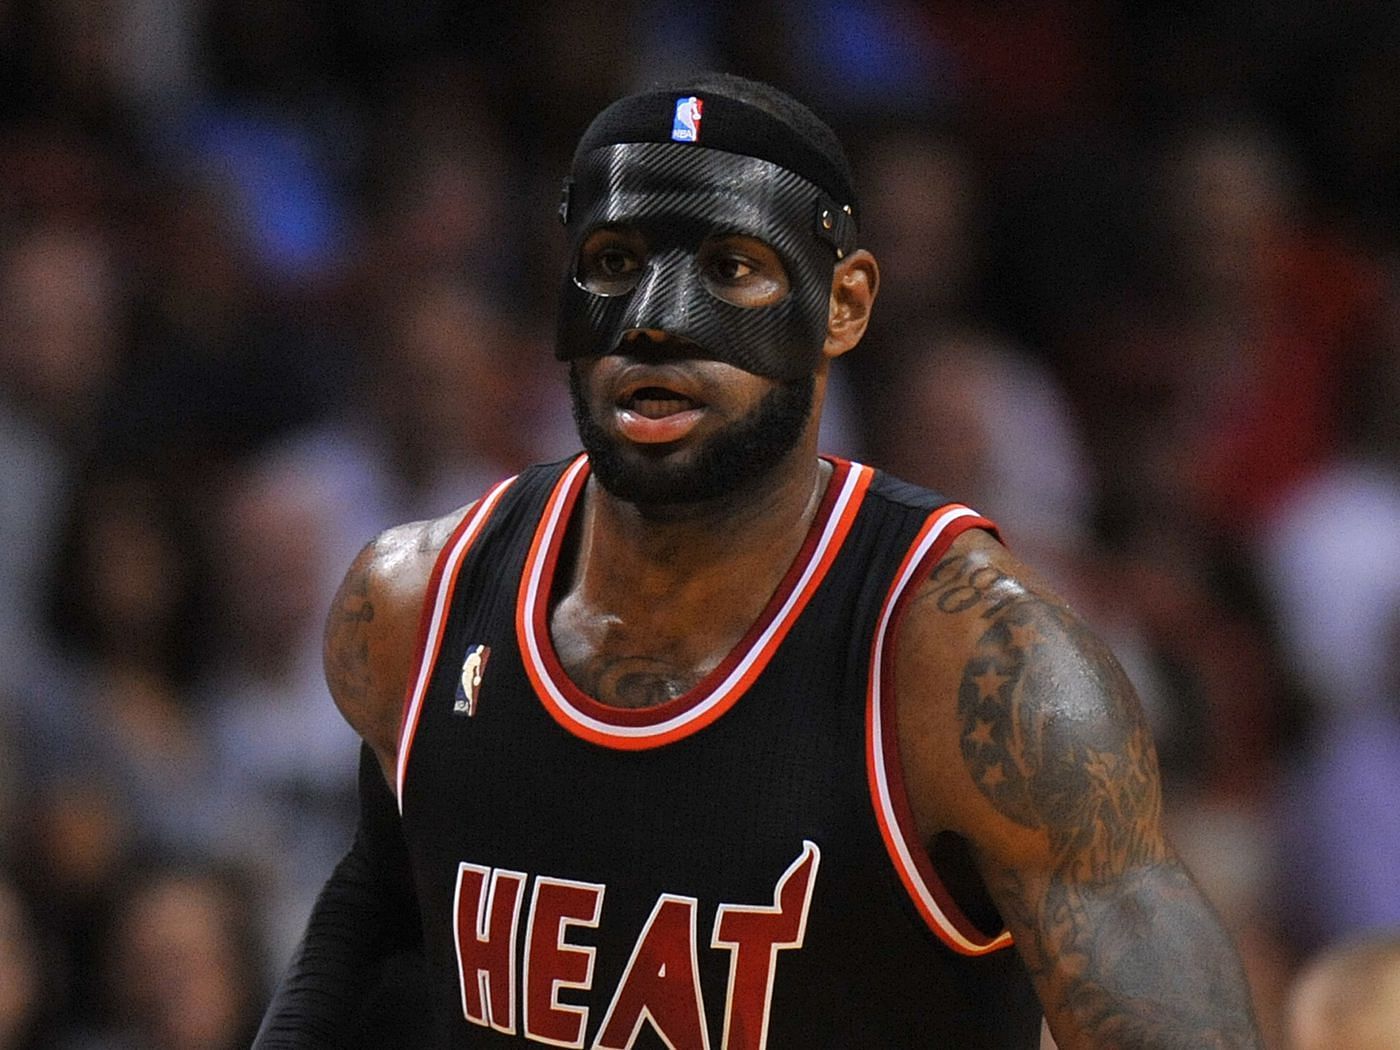 LeBron James in action during the 2013-14 season for the Miami Heat [Source SB Nation]